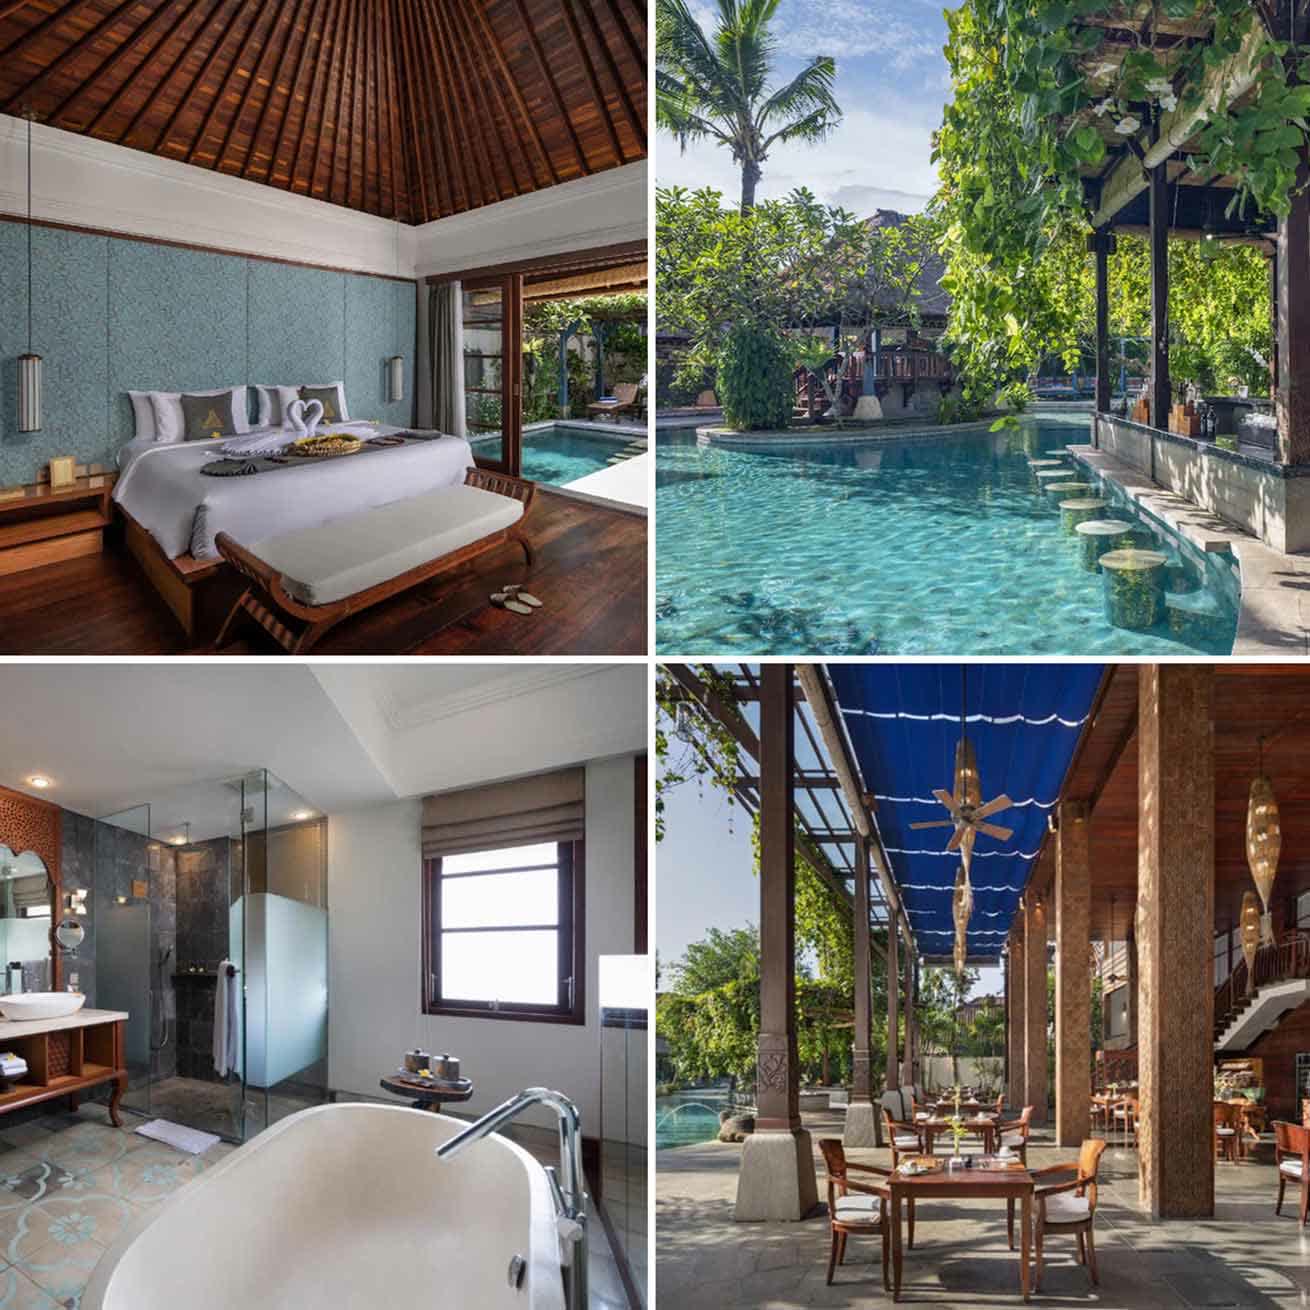 Deluxe rooms and swimming pool of The Alantara Sanur